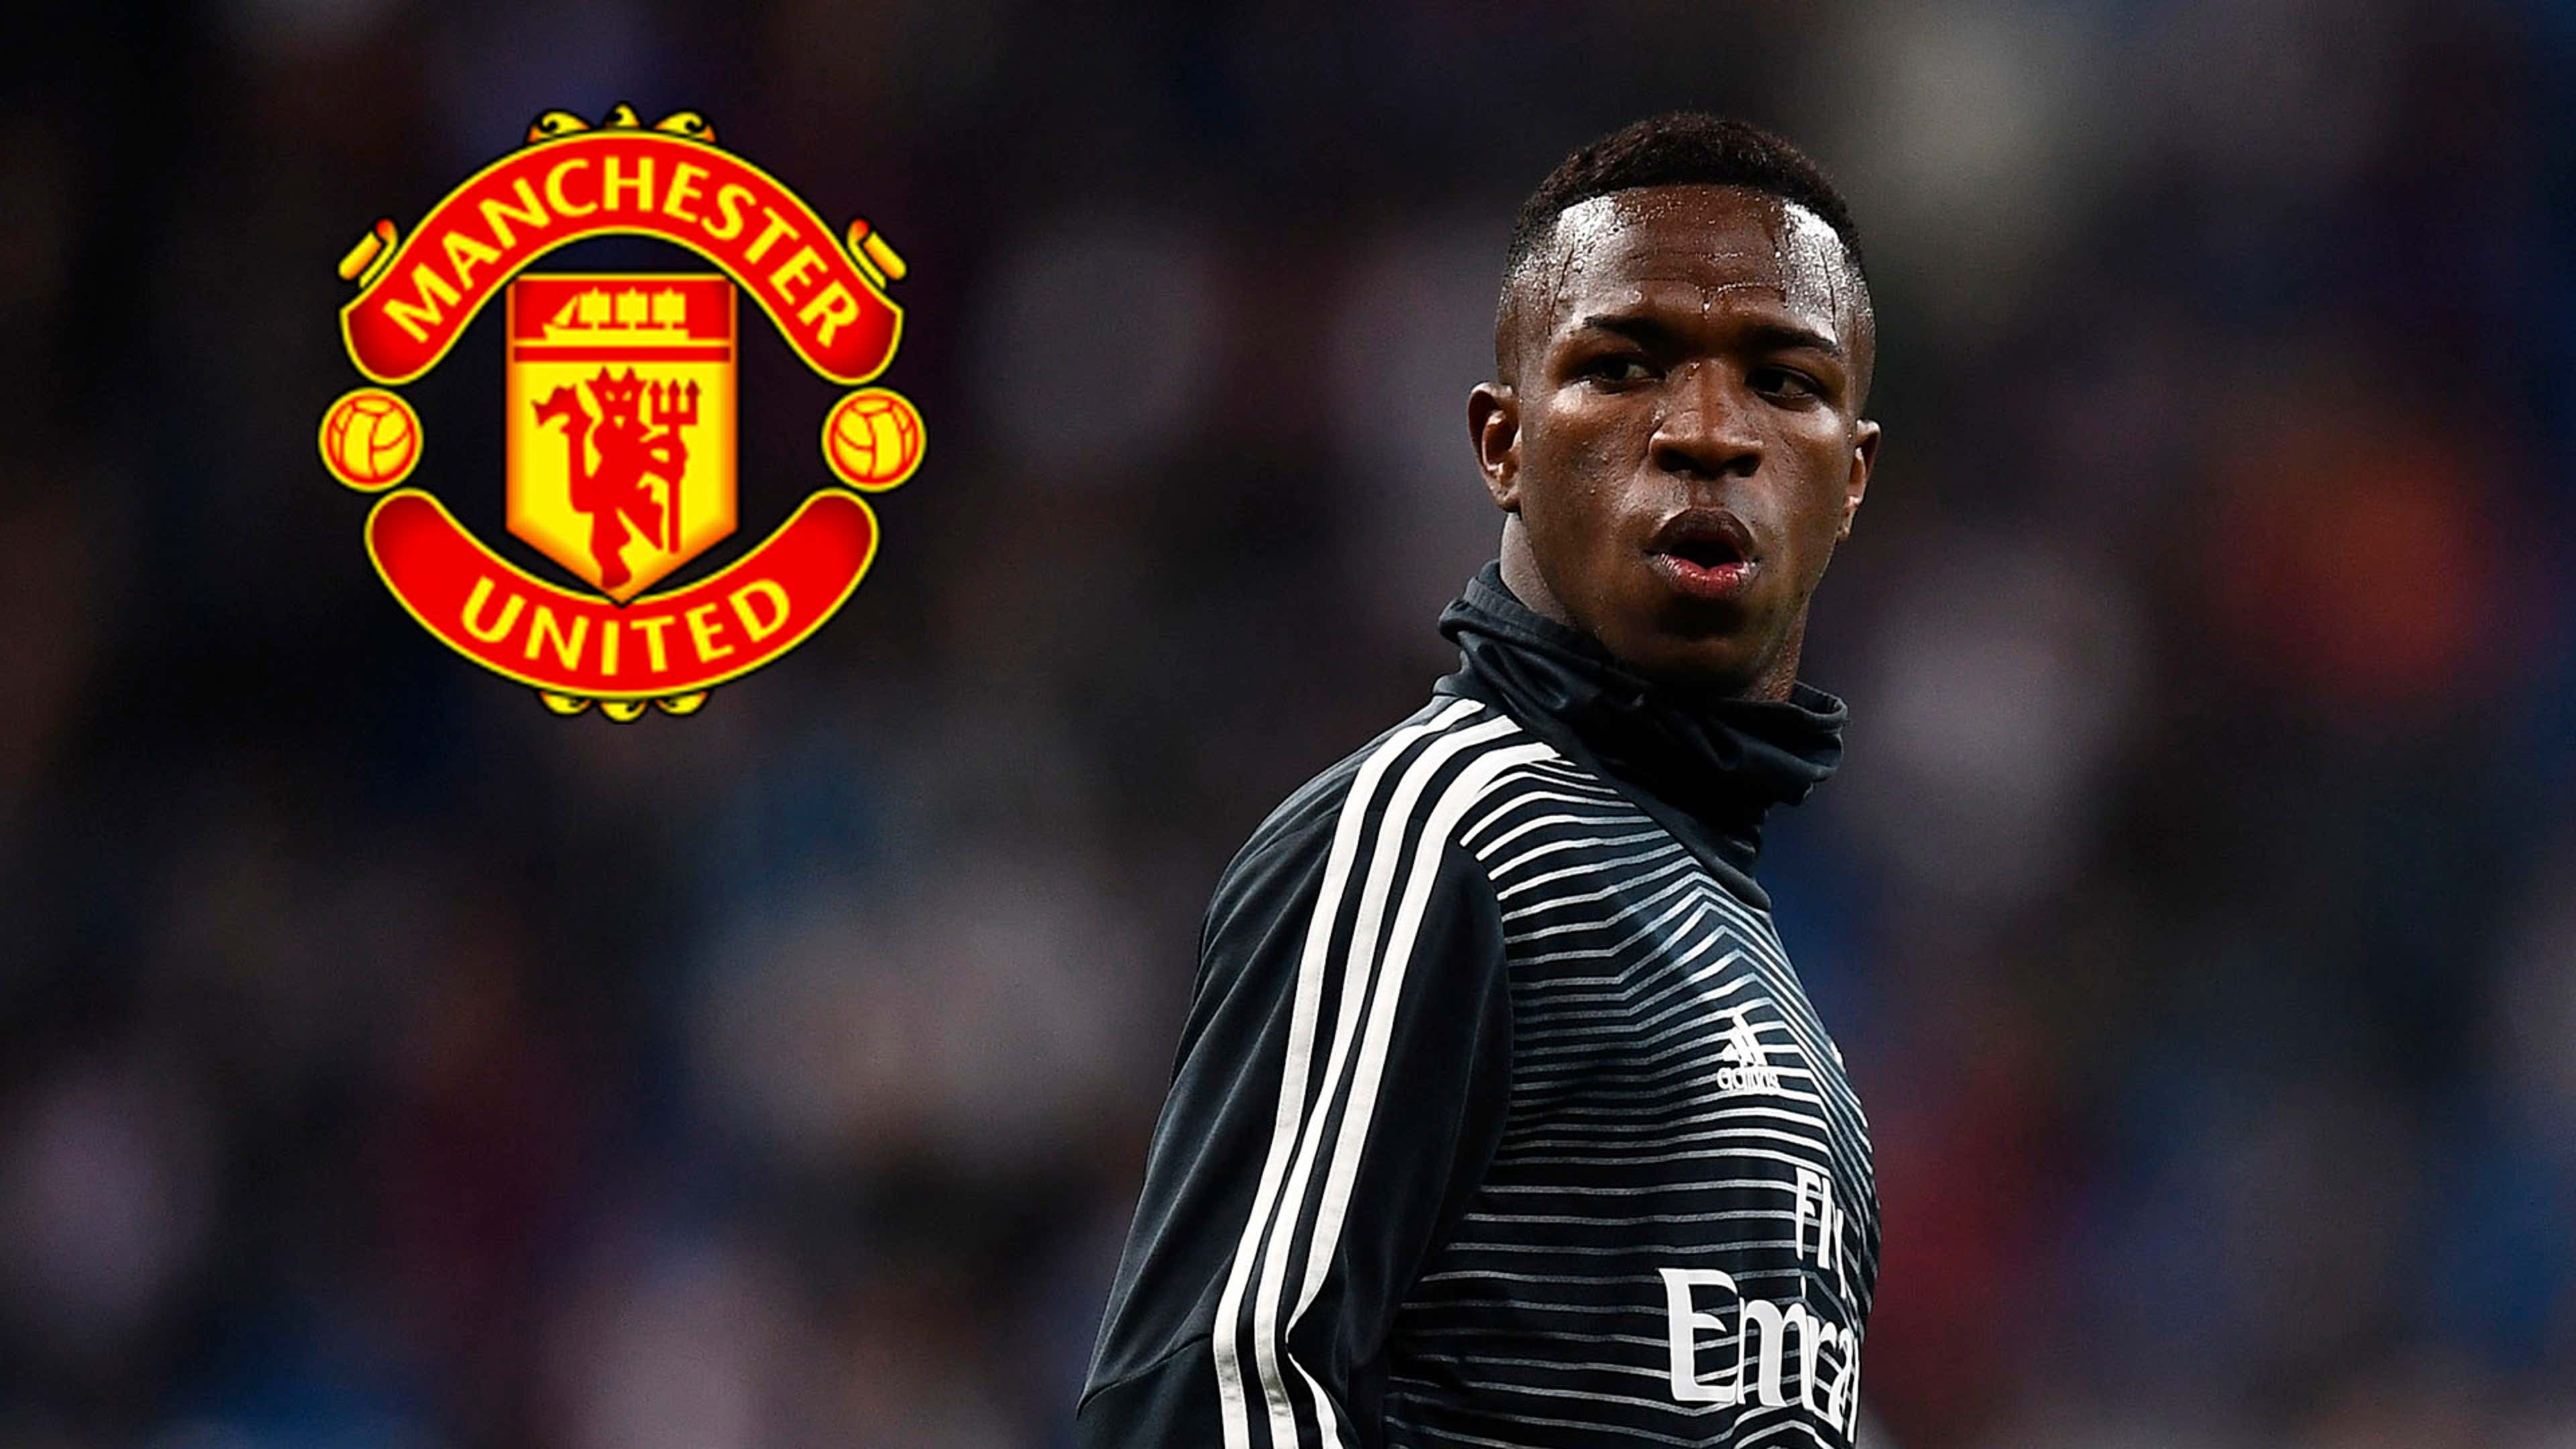 Real Madrid wonderkid Vinicius Jr will move to Man Utd in £100m  deal...according to Football Manager 2019! | Goal.com UK